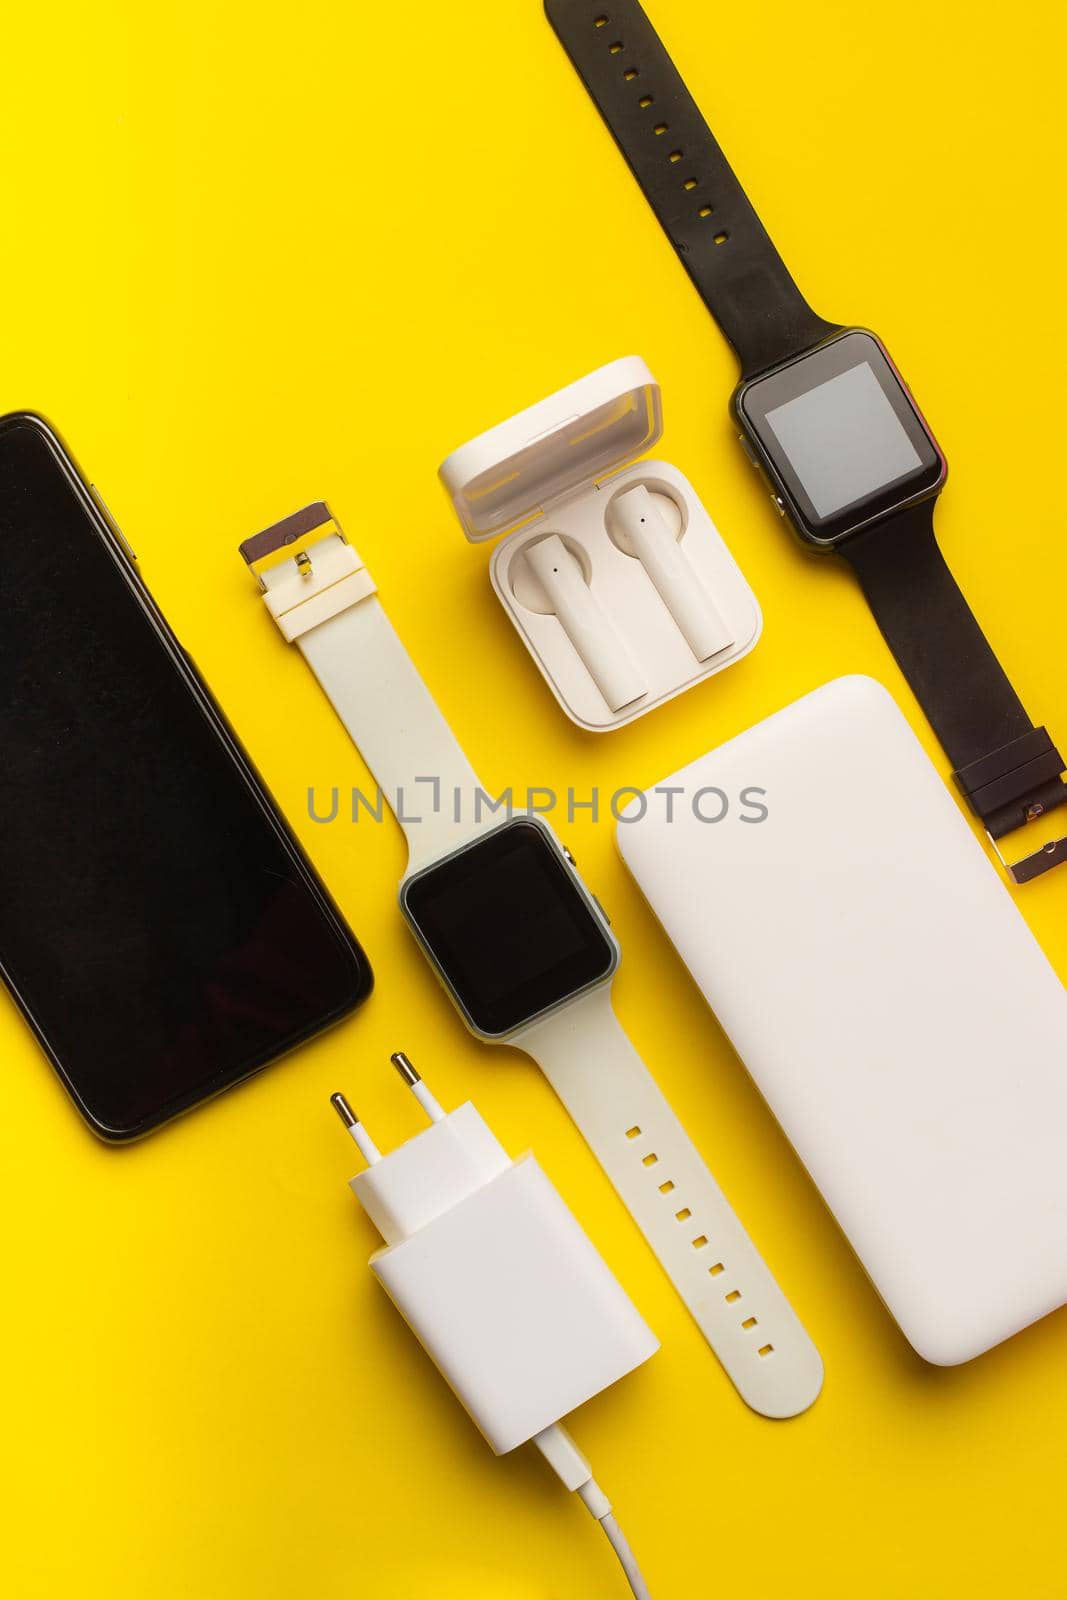 Layout of modern gadgets on a yellow background . Online communication. Internet connection. Mobile communication. 5g. Black and white technology. Modern technologies. Copy space